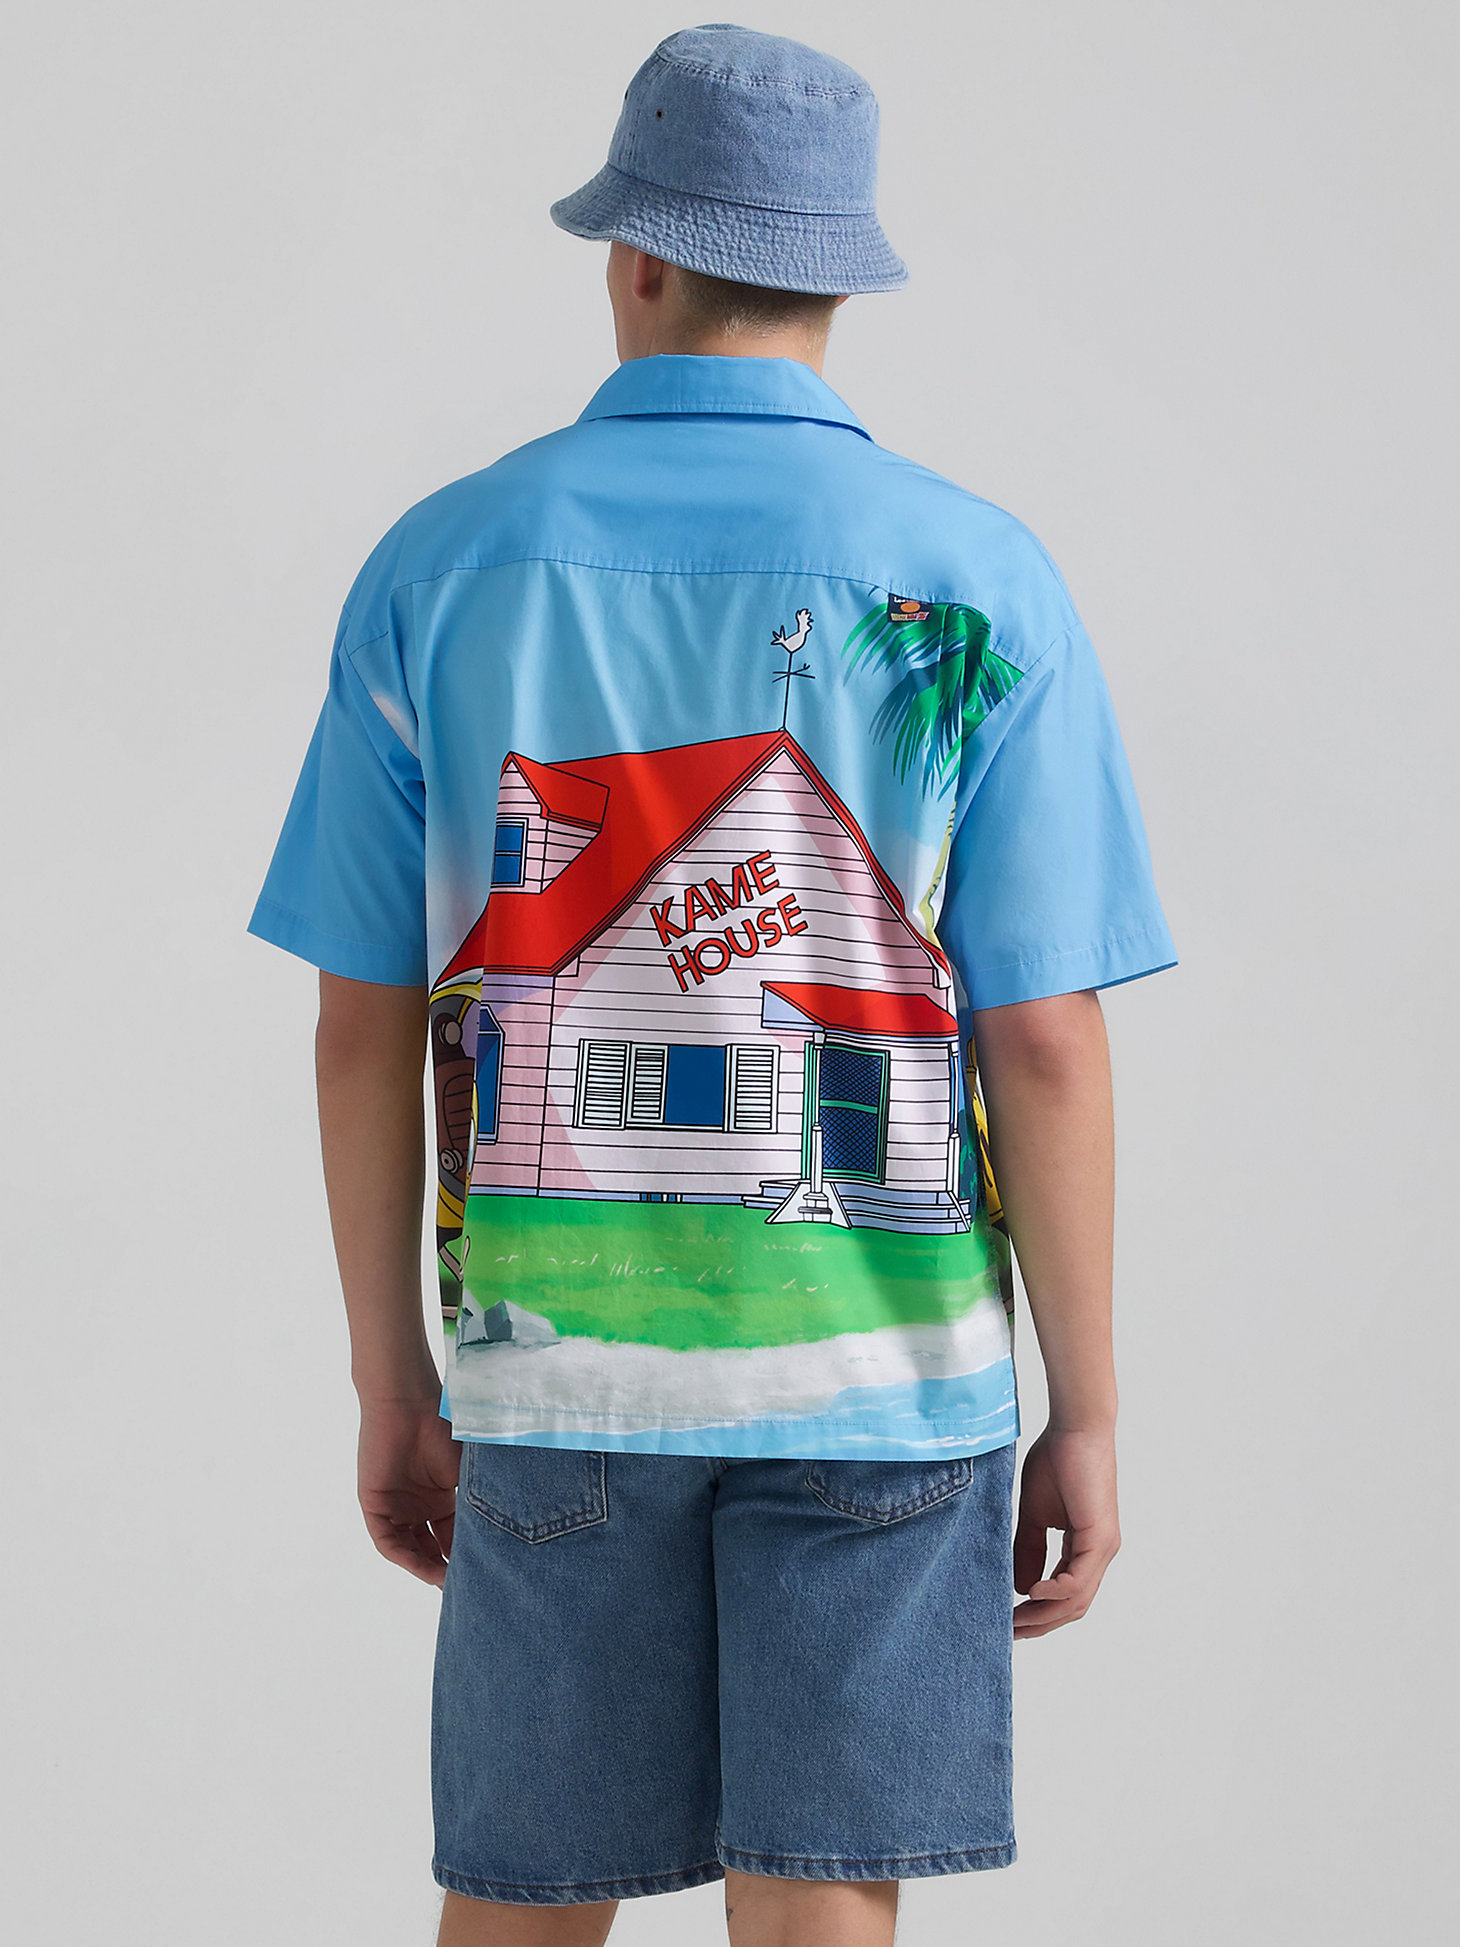 Men's Lee and Dragon Ball Z Kame House Resort Shirt in Blue alternative view 1